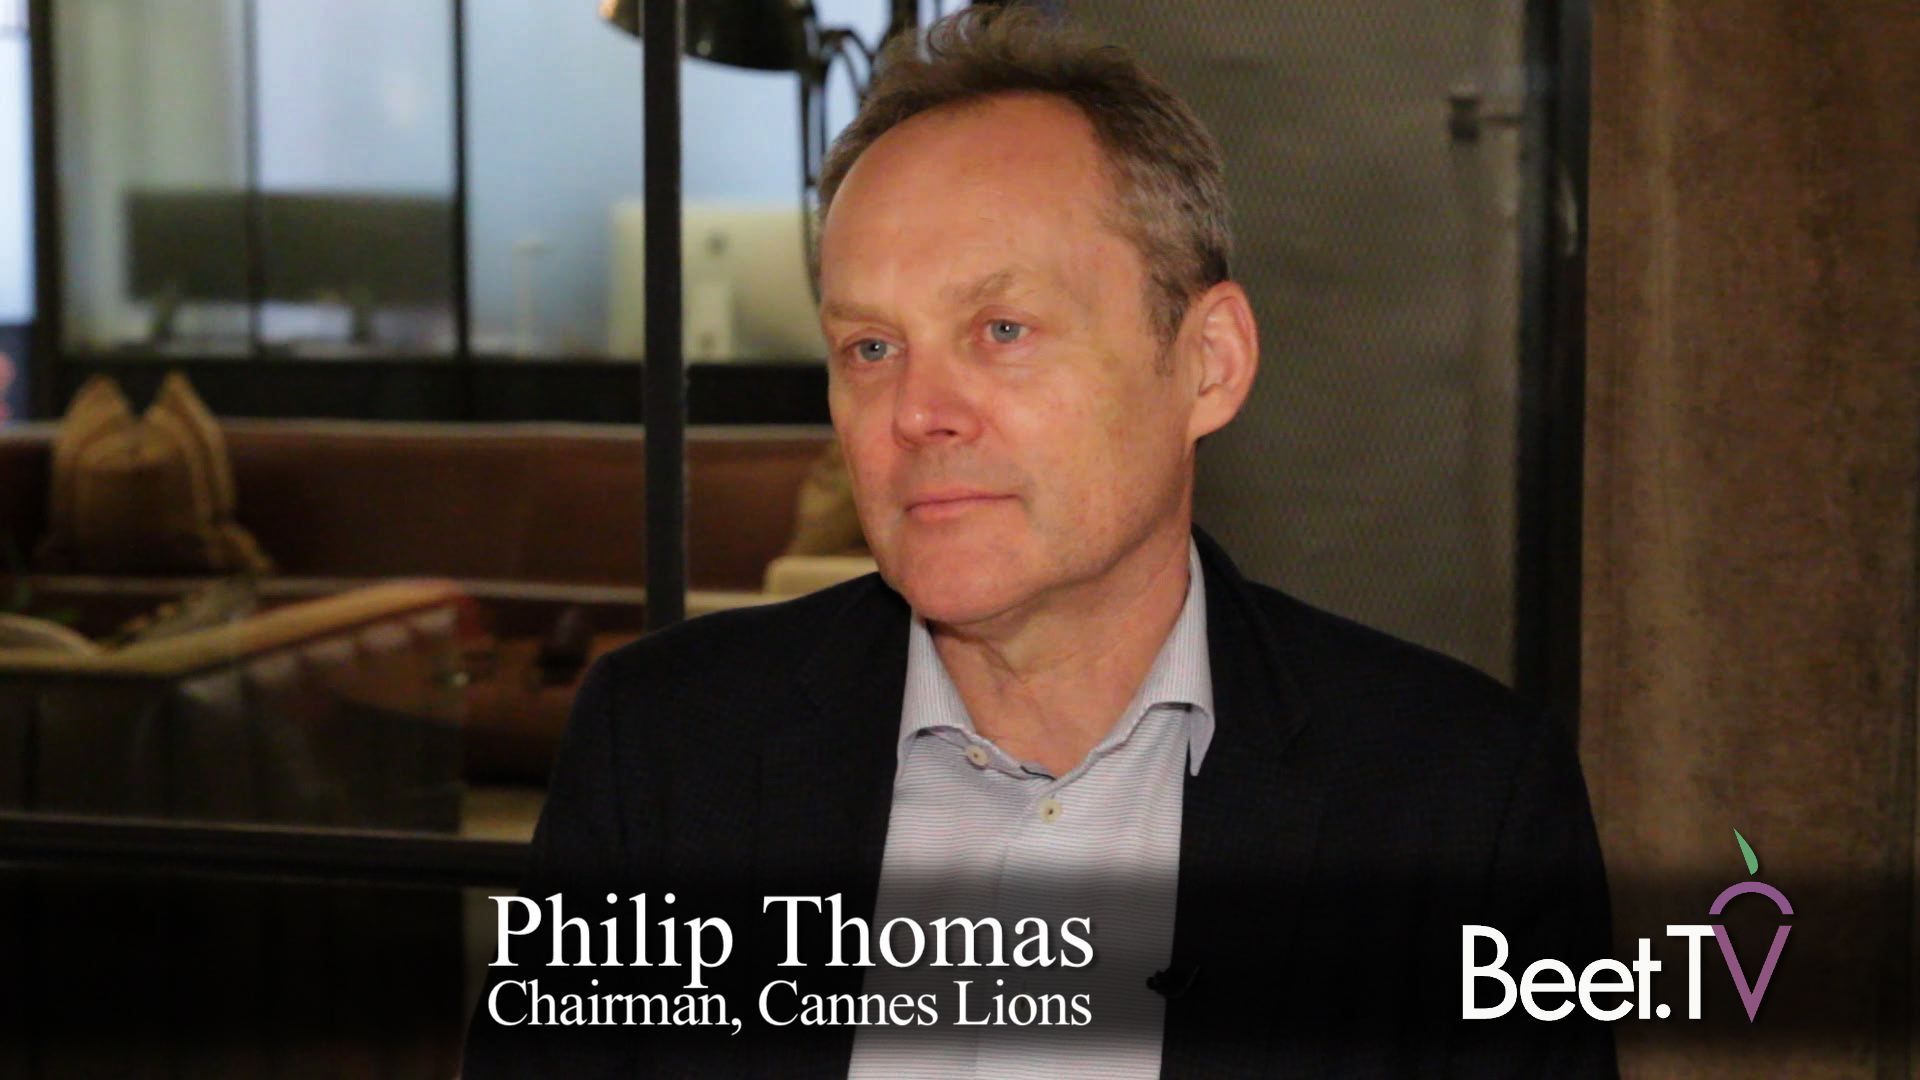 Brands, New Awards, CMO Growth Council: Cannes Lions Chairman Thomas Previews 2019 Festival